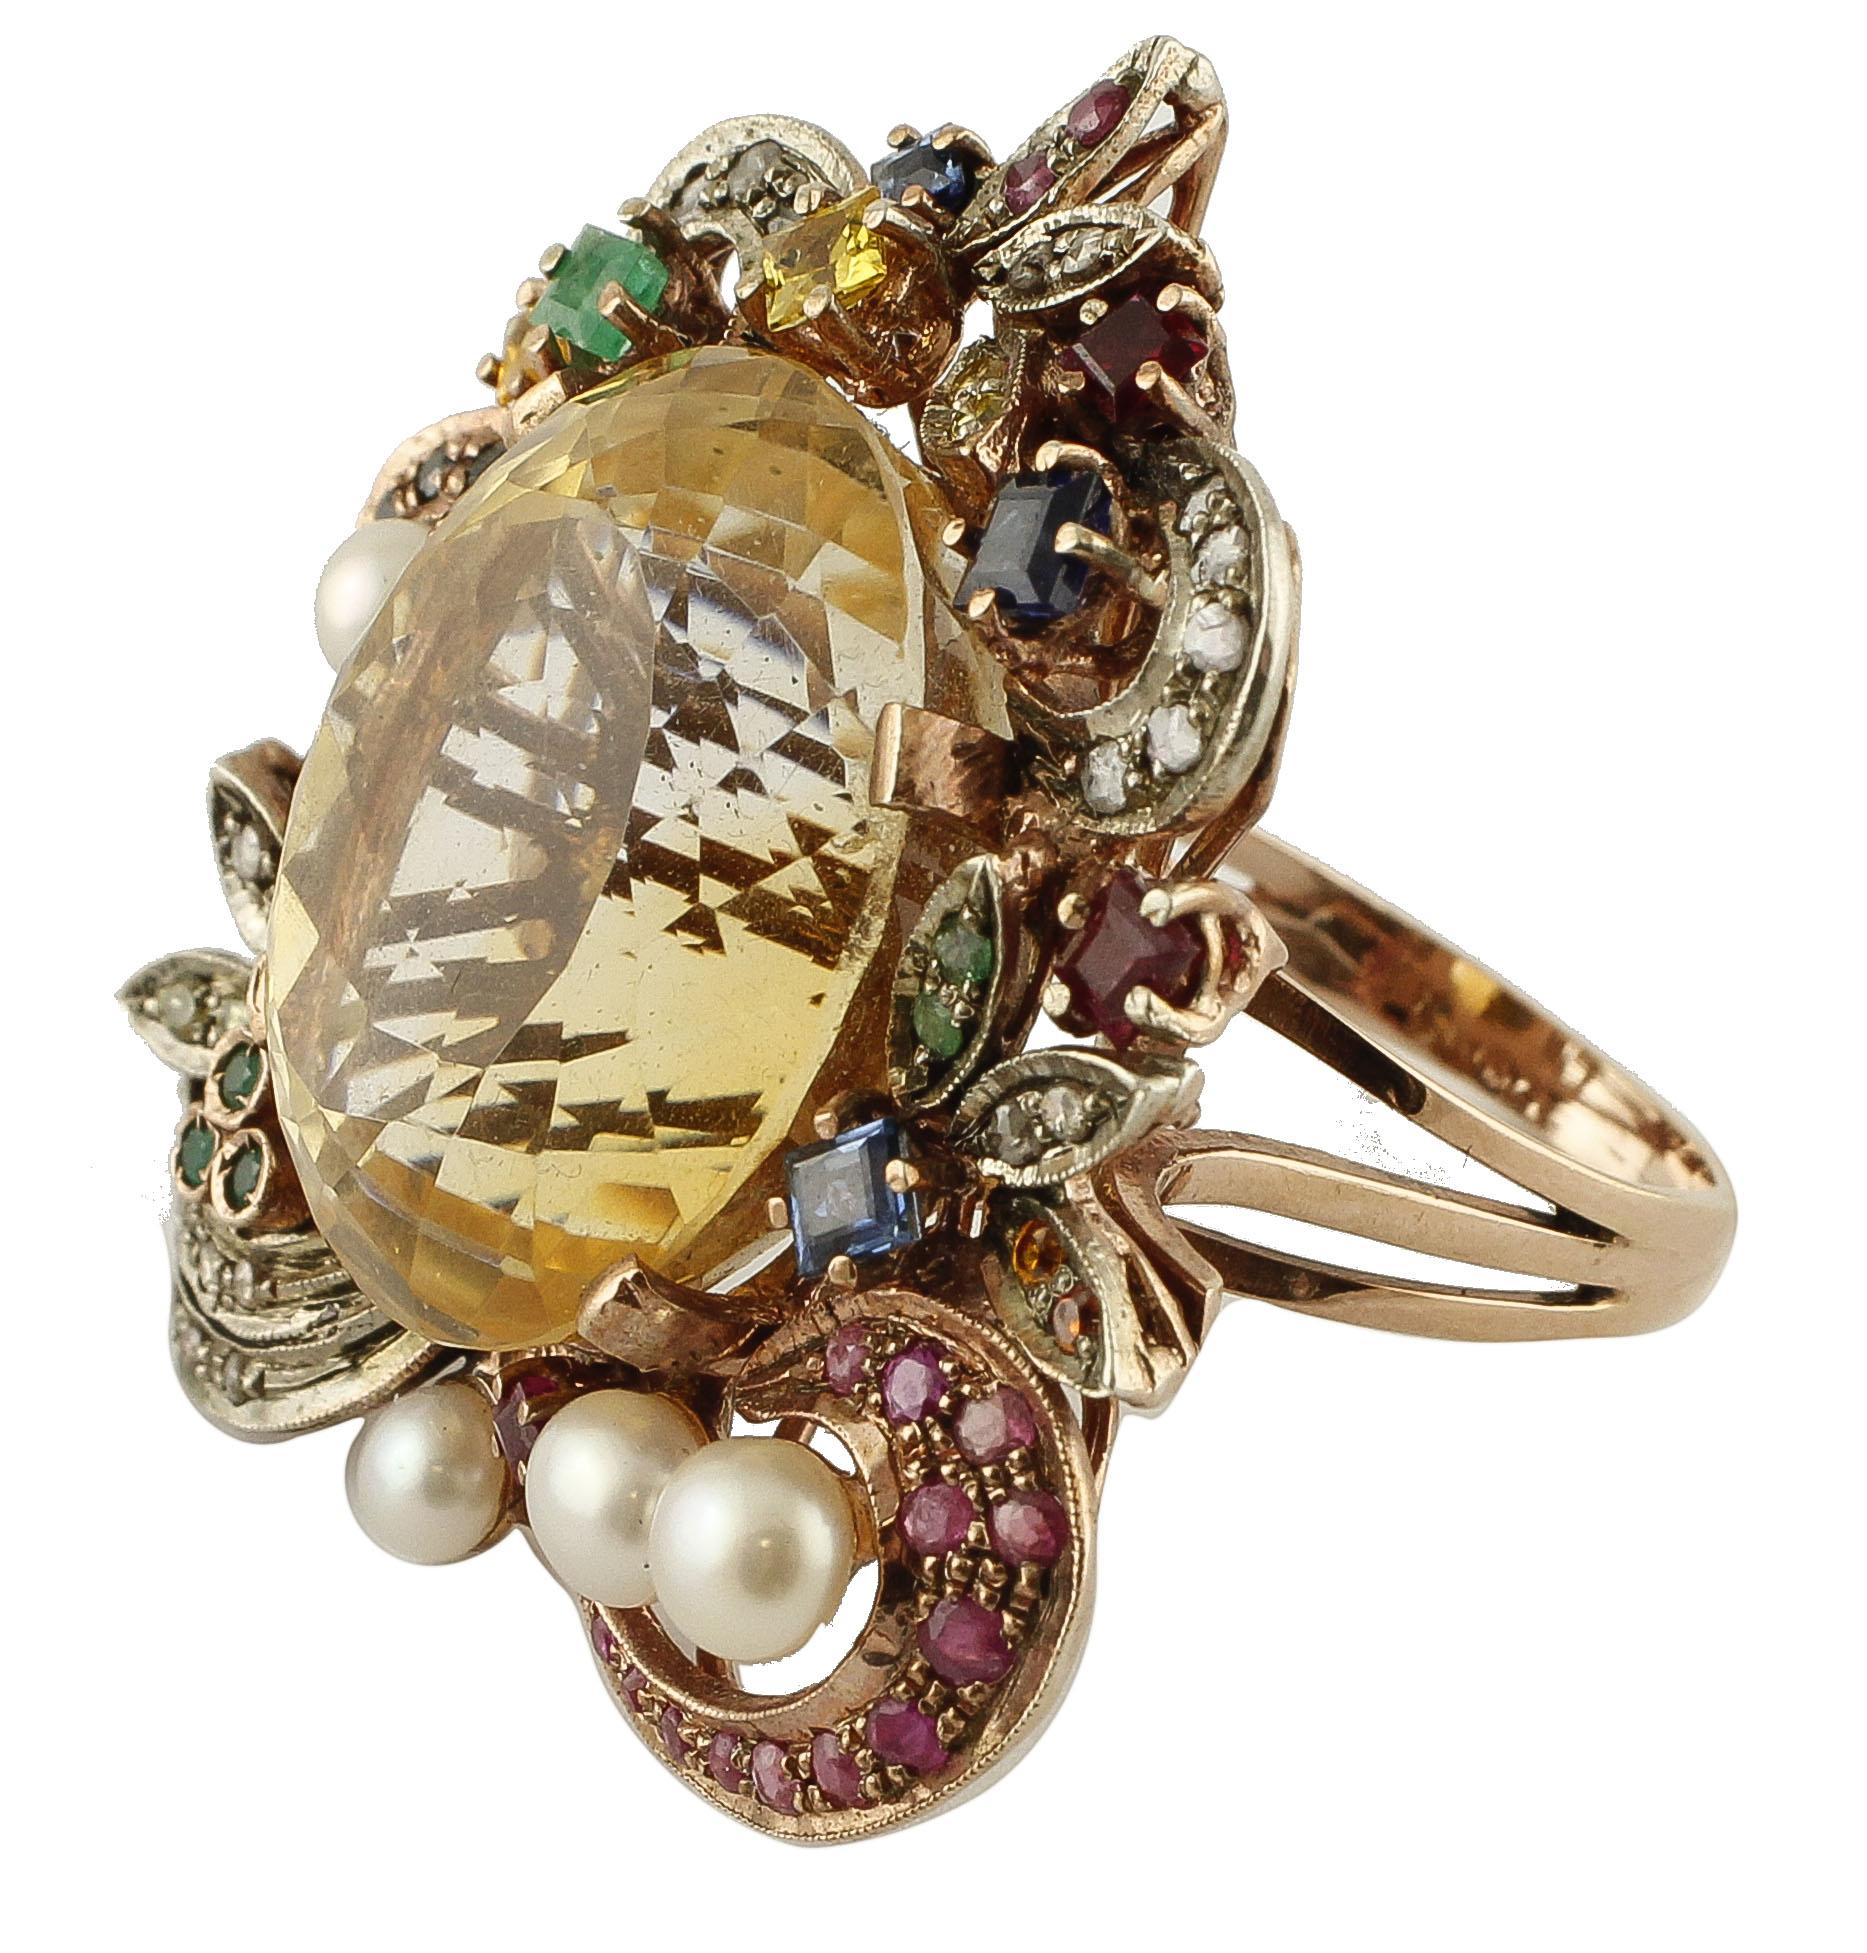 Beautiful retro ring in 9k rose gold and silver structure. The ring is mounted with a big yellow topaz in the centre surrounded by flowery details in gold and silver studded with sapphires, diamond, emeralds, rubies and littlre pearls. 
This ring is